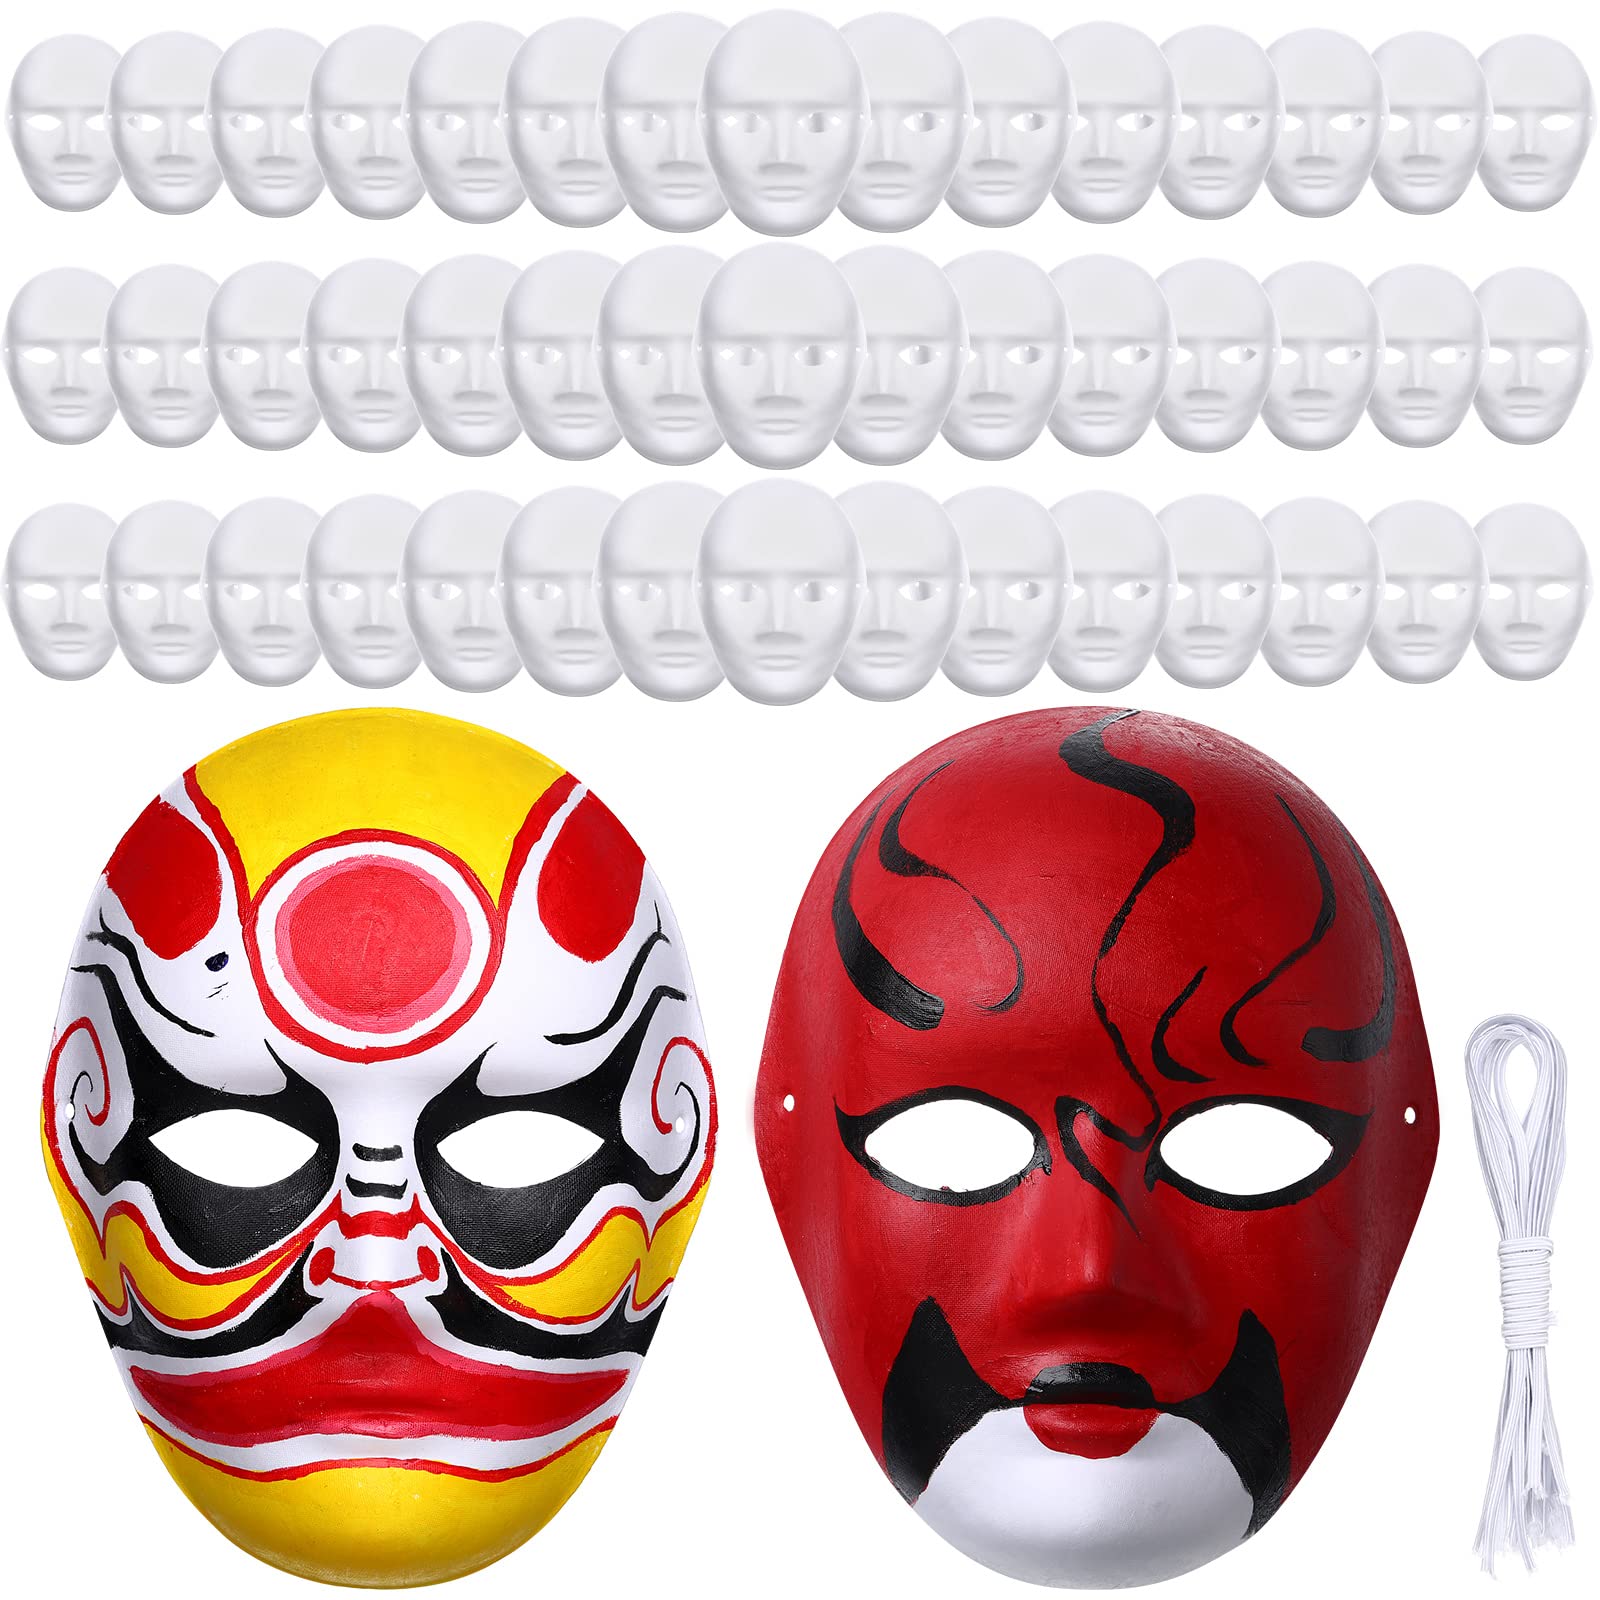 Aoriher 50 Pcs Paper Mache Mask DIY Full Face Masks White Craft Masks for  Men Mask to Decorate Pulp Blank Paintable Mask Costume Craft Mask Bulk for  Mardi Gras Masquerade Art Cosplay